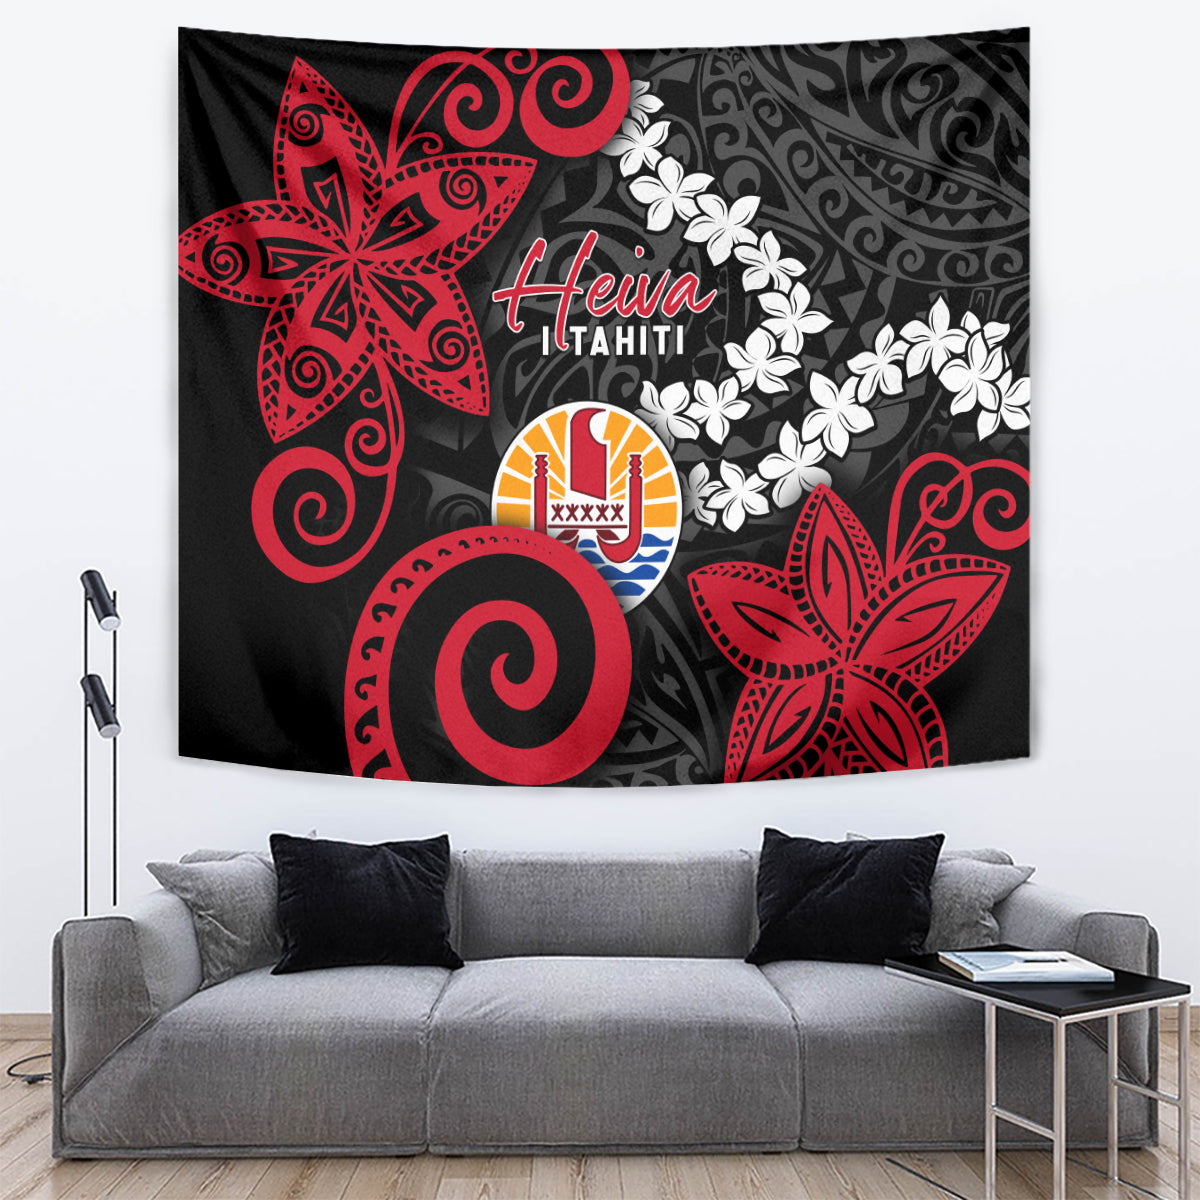 Tahiti Heiva Festival Tapestry Floral Pattern With Coat Of Arms